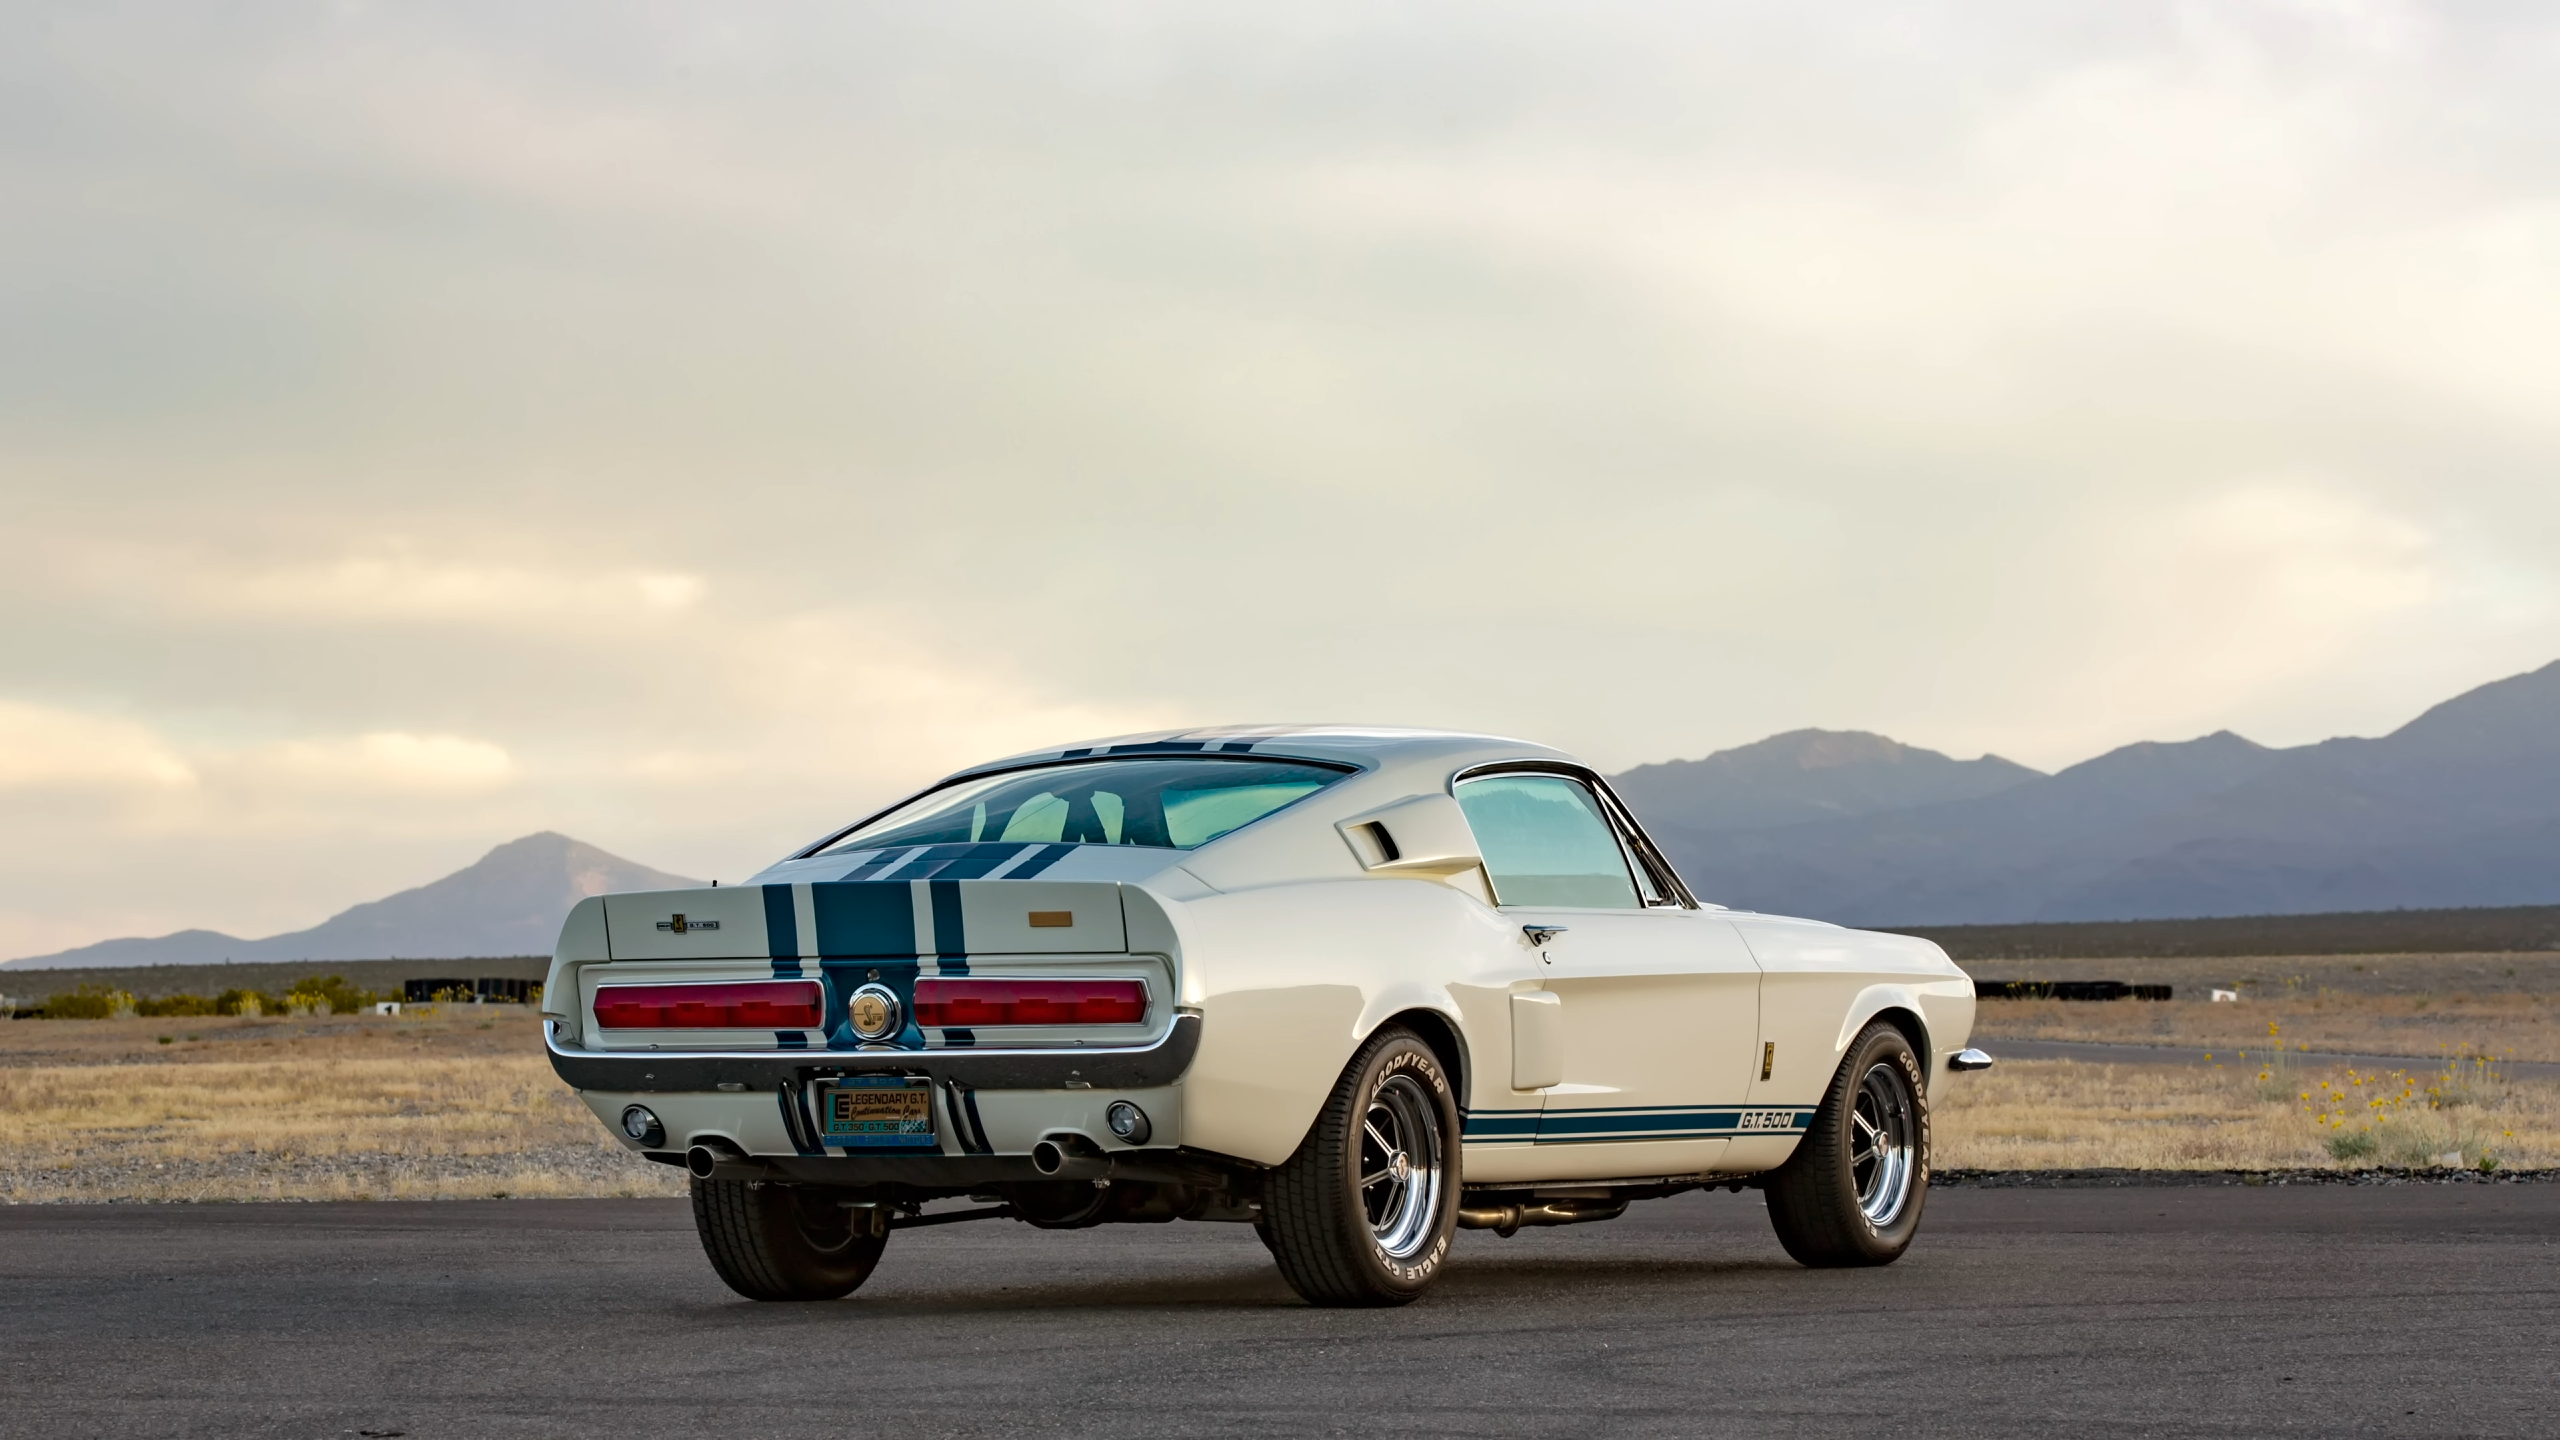 Car Muscle Cars Ford Mustang Shelby 2560x1440